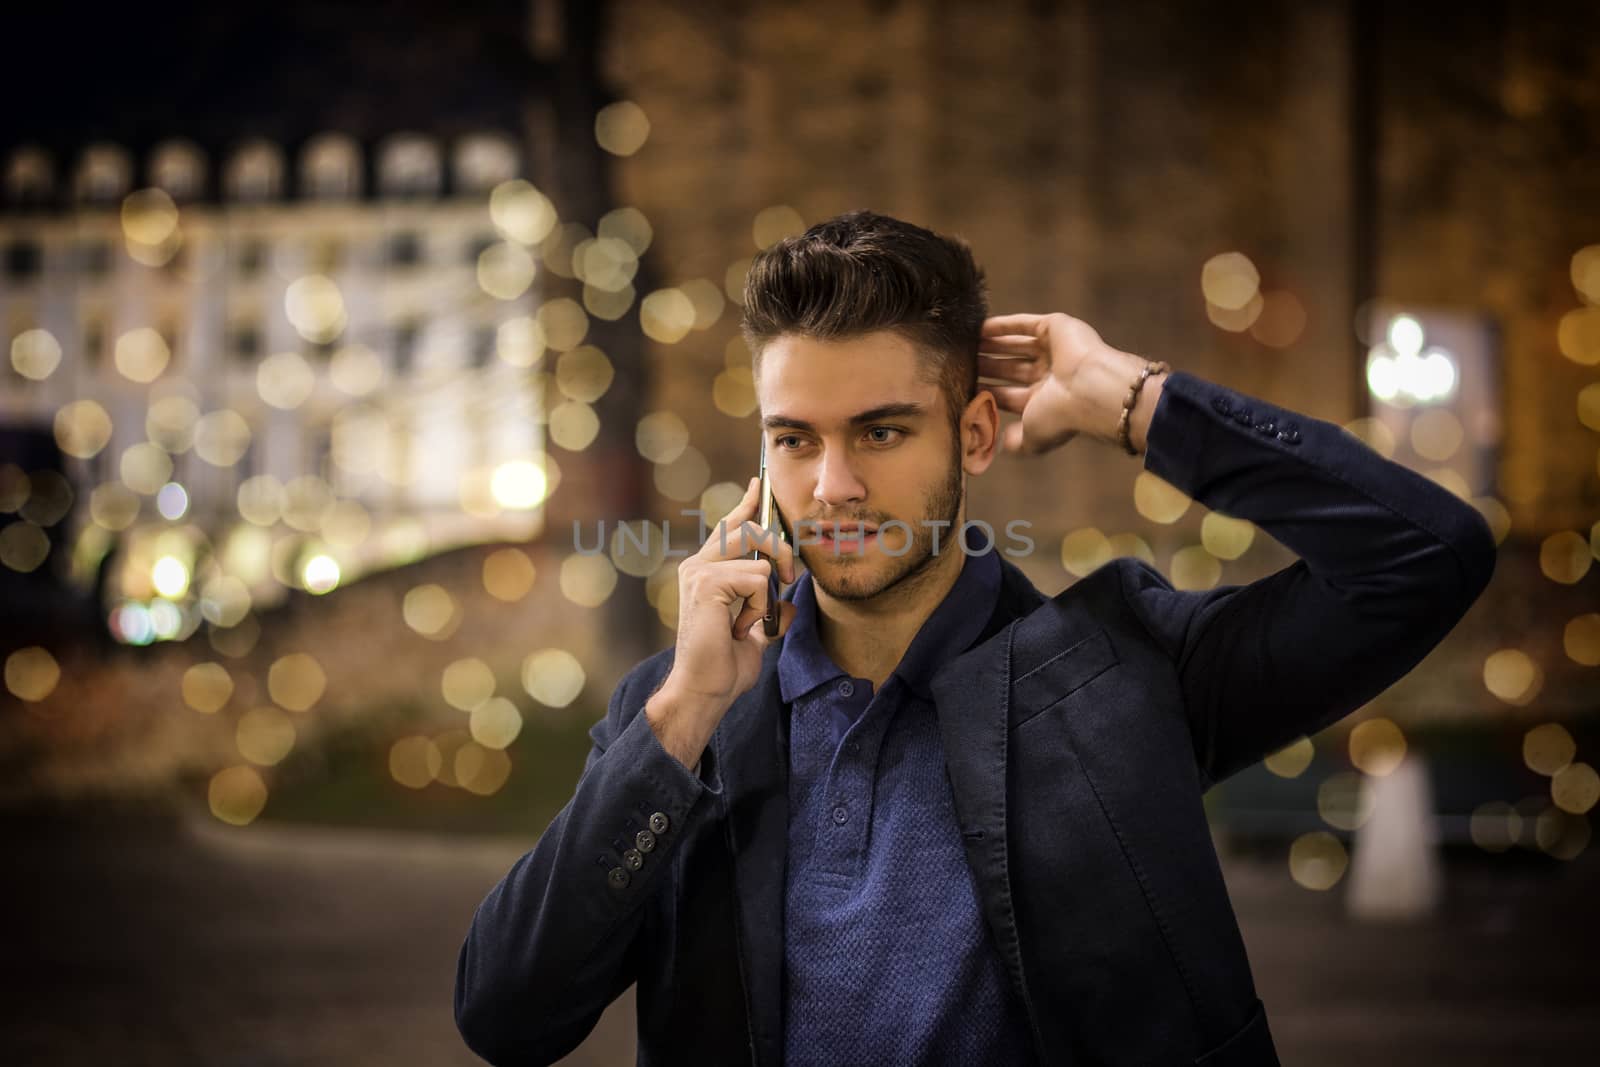 Attractive young man portrait at night talking on the phone, with city lights behind him in Turin, Italy